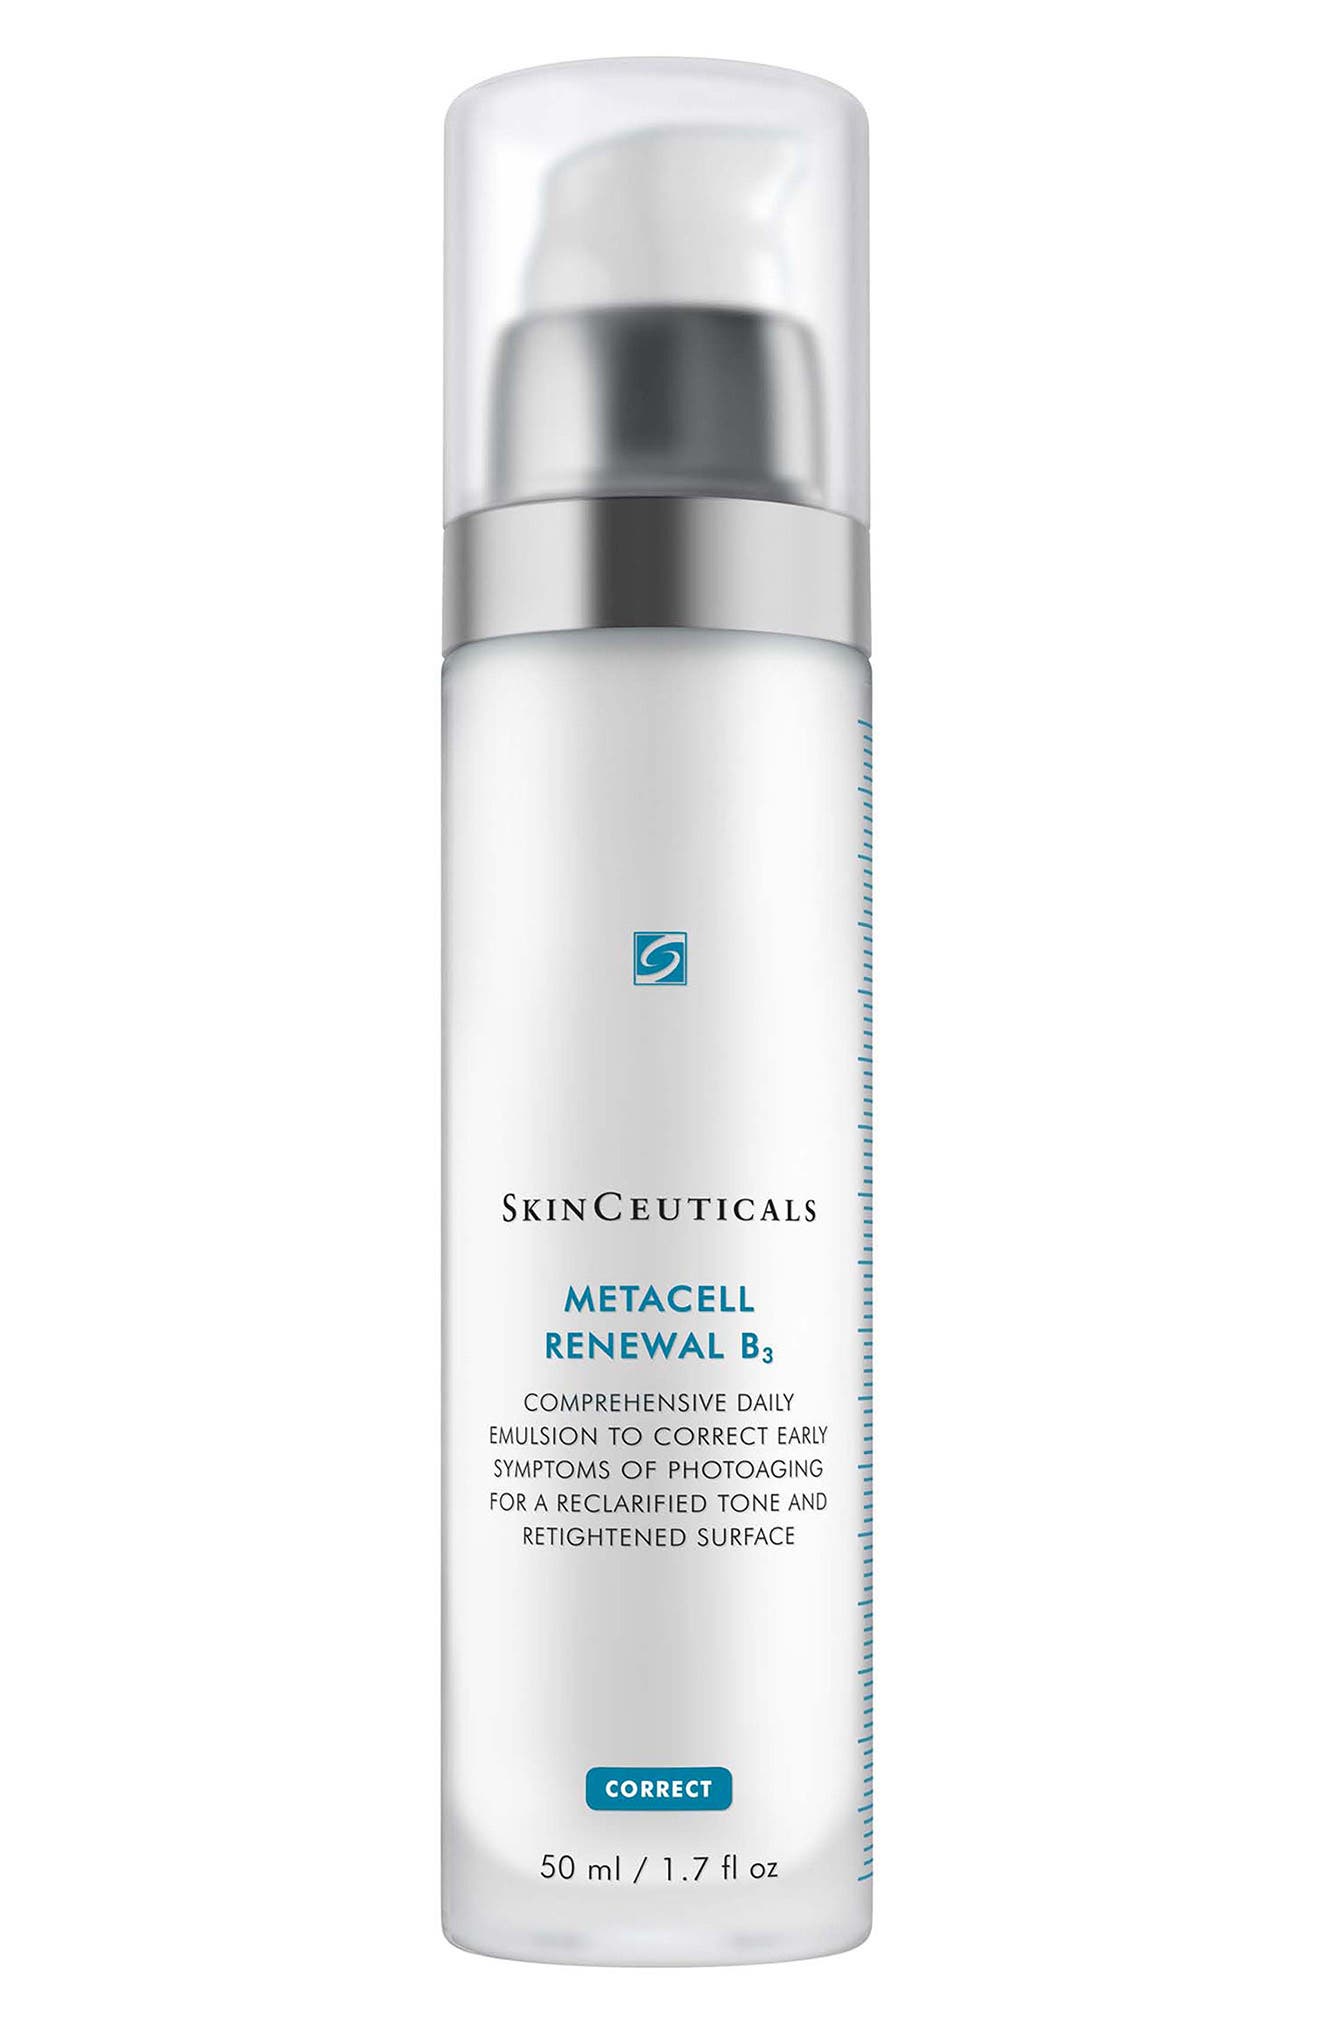 EAN 3606000400429 product image for Skinceuticals Metacell Renewal B3 Comprehensive Daily Emulsion | upcitemdb.com